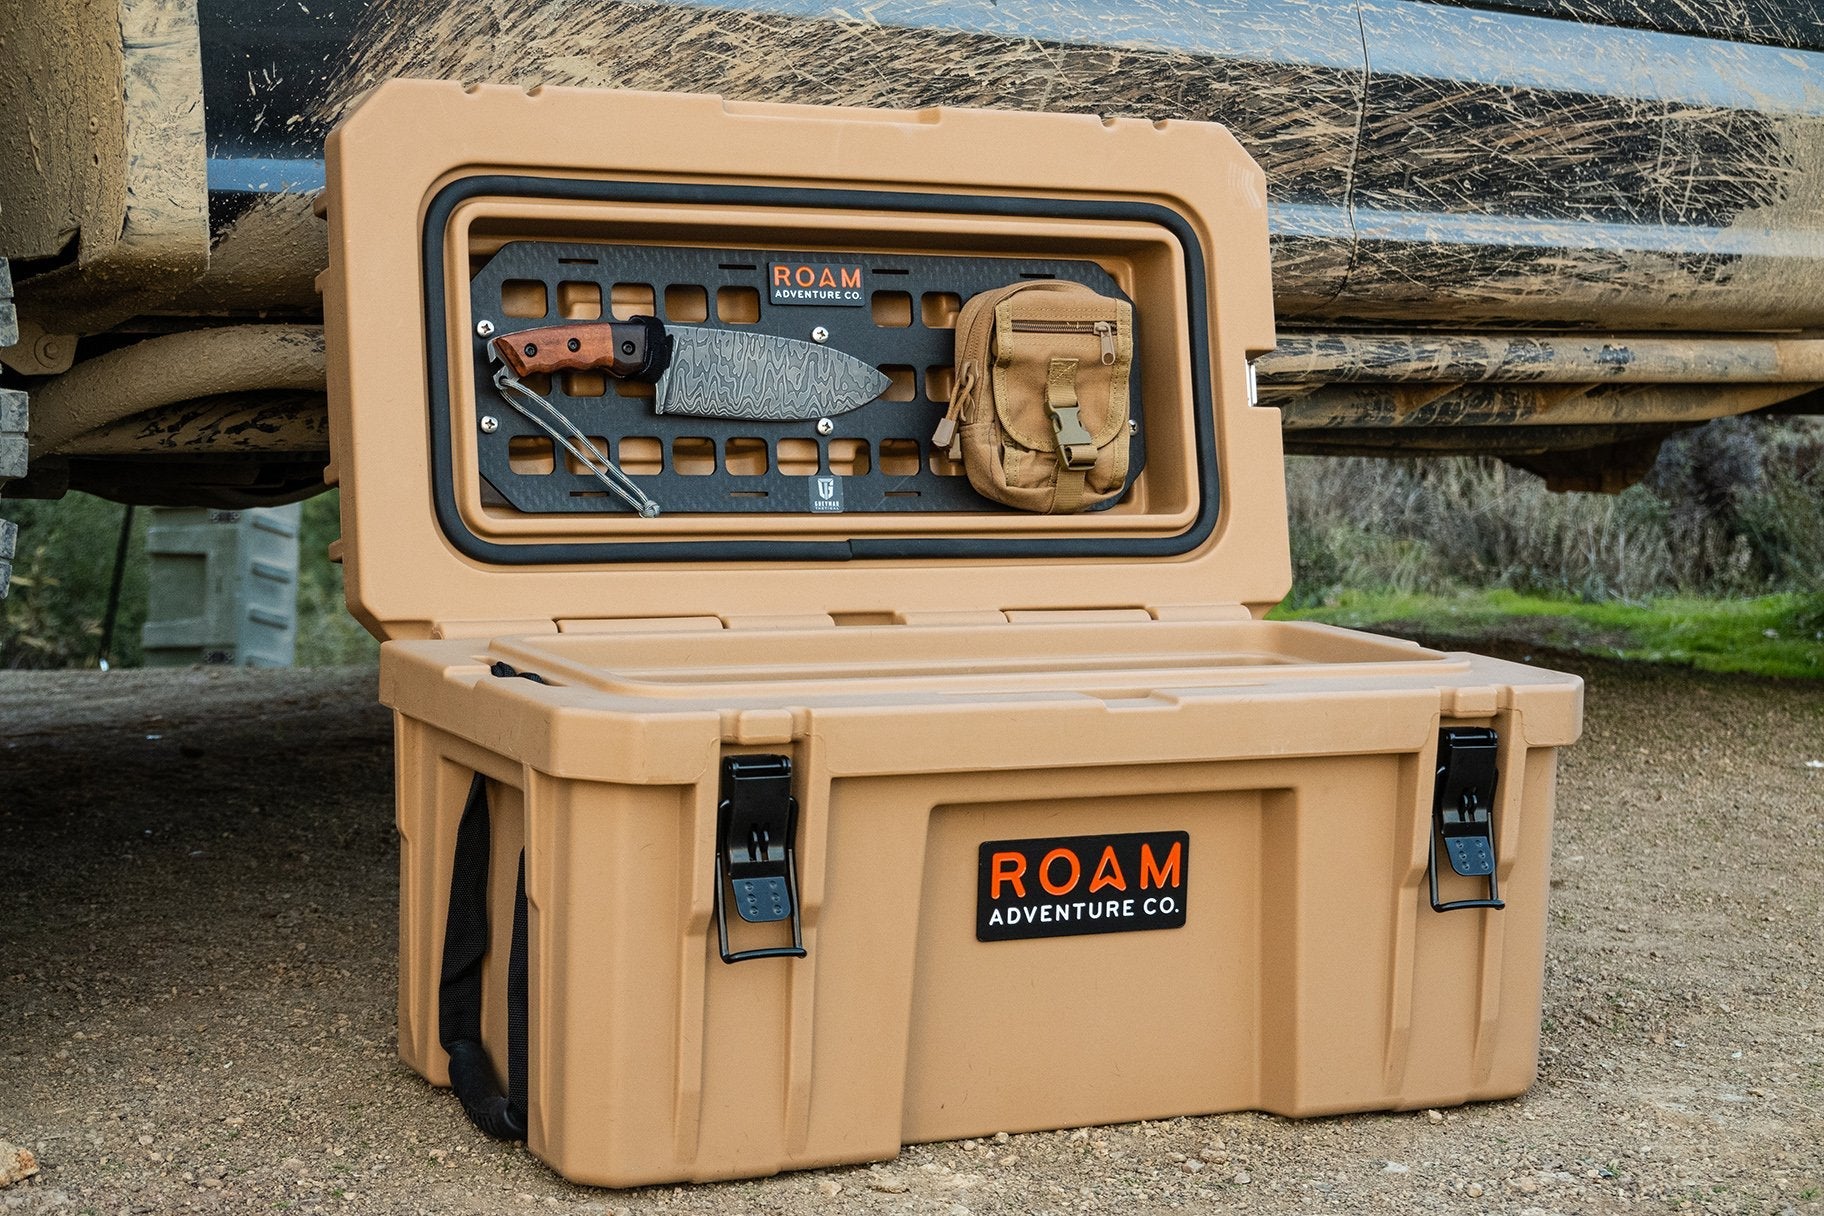 52L RUGGED CASE MOLLE PANEL - BaseCamp Provisions